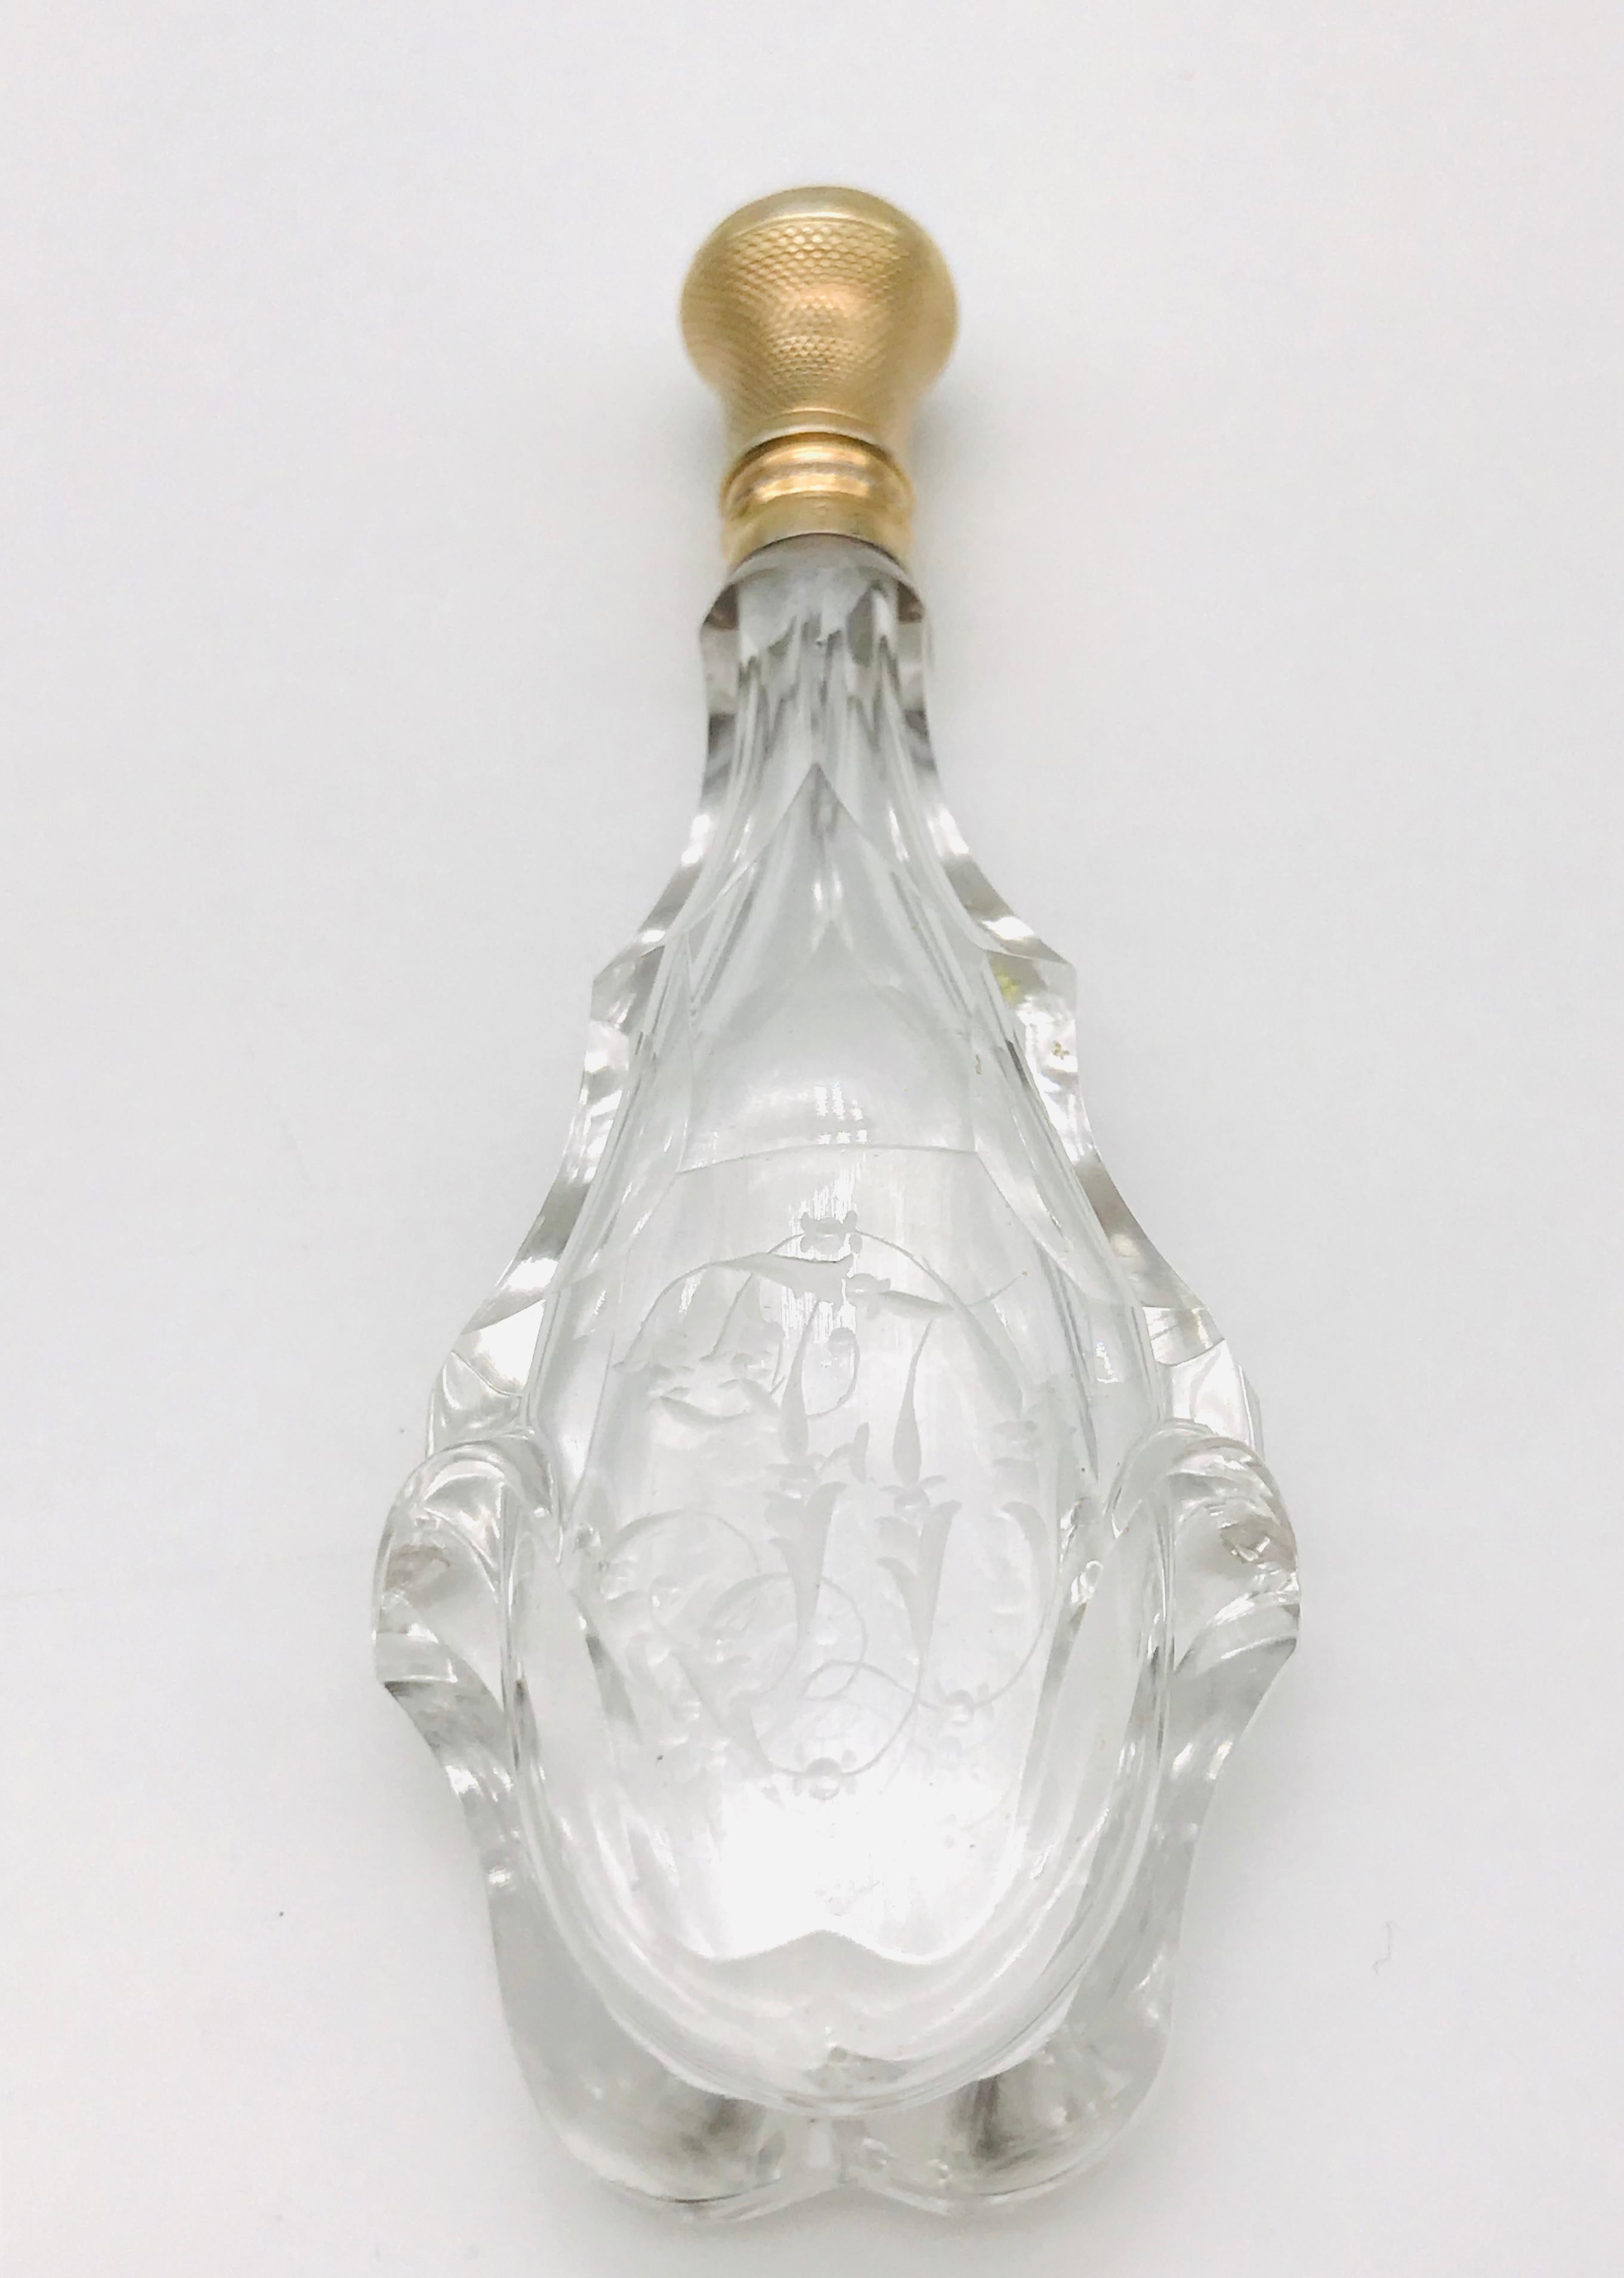 Crystal Perfume Bottle Charle X Period (1830)
Finely chiseled crystal. 
Blown, cut and chiseled glass.
Silver metal cap. 
Letter engraving JD 